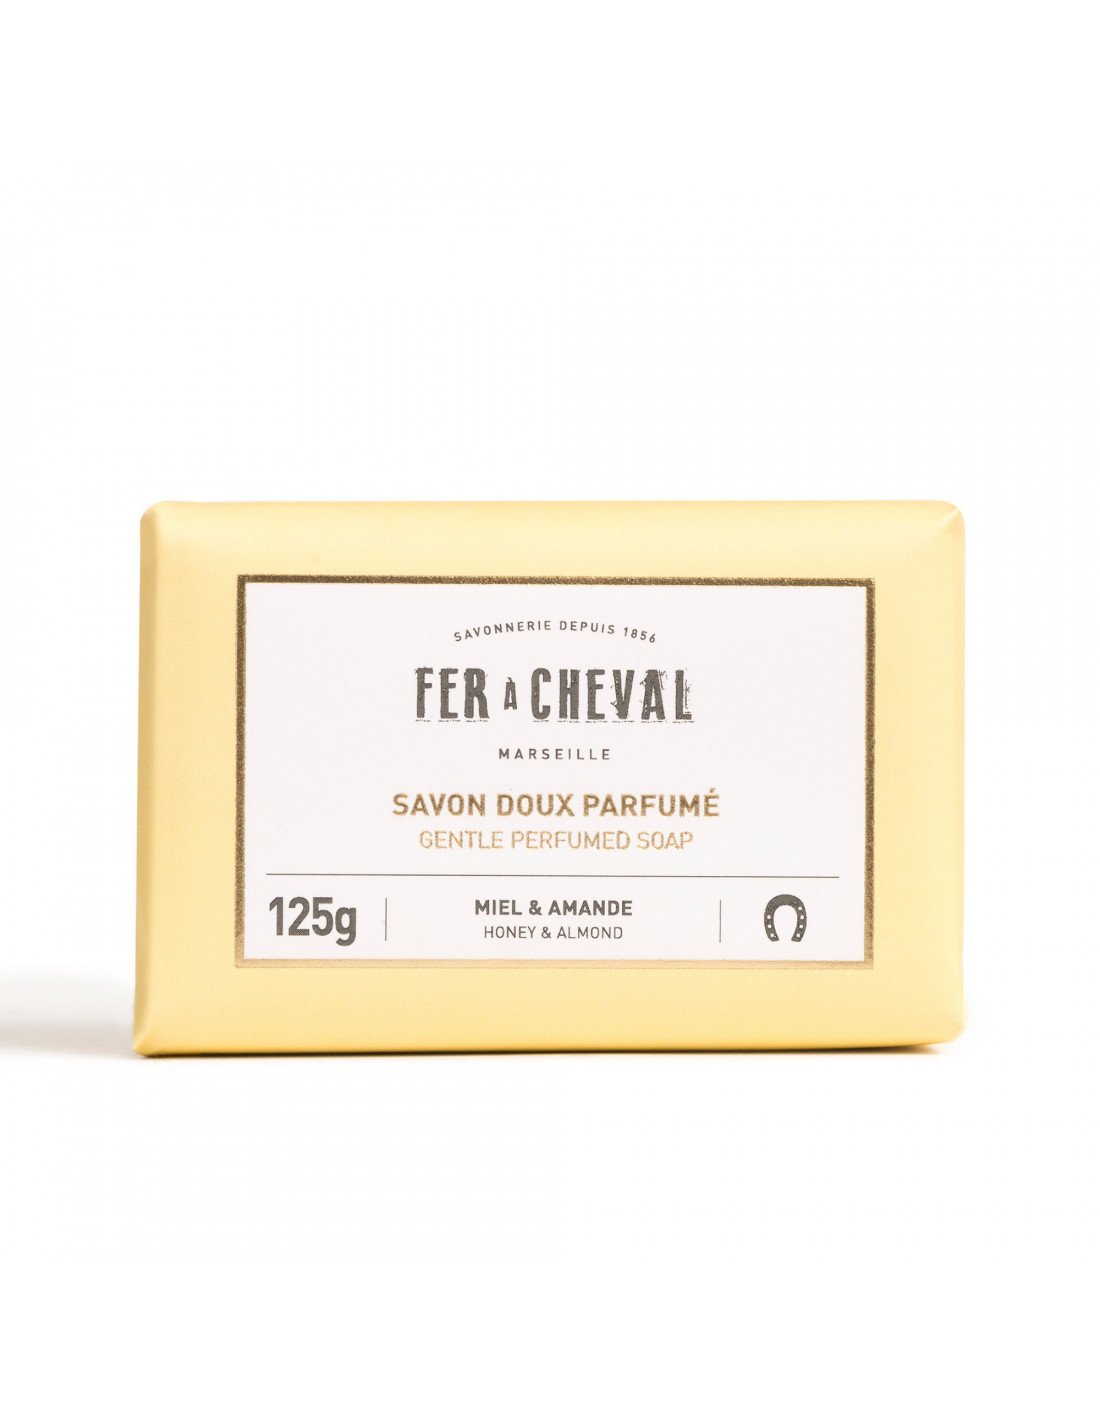 Soap 125g HONEY & ALMOND with sweet almond oil and shea butter, FAS